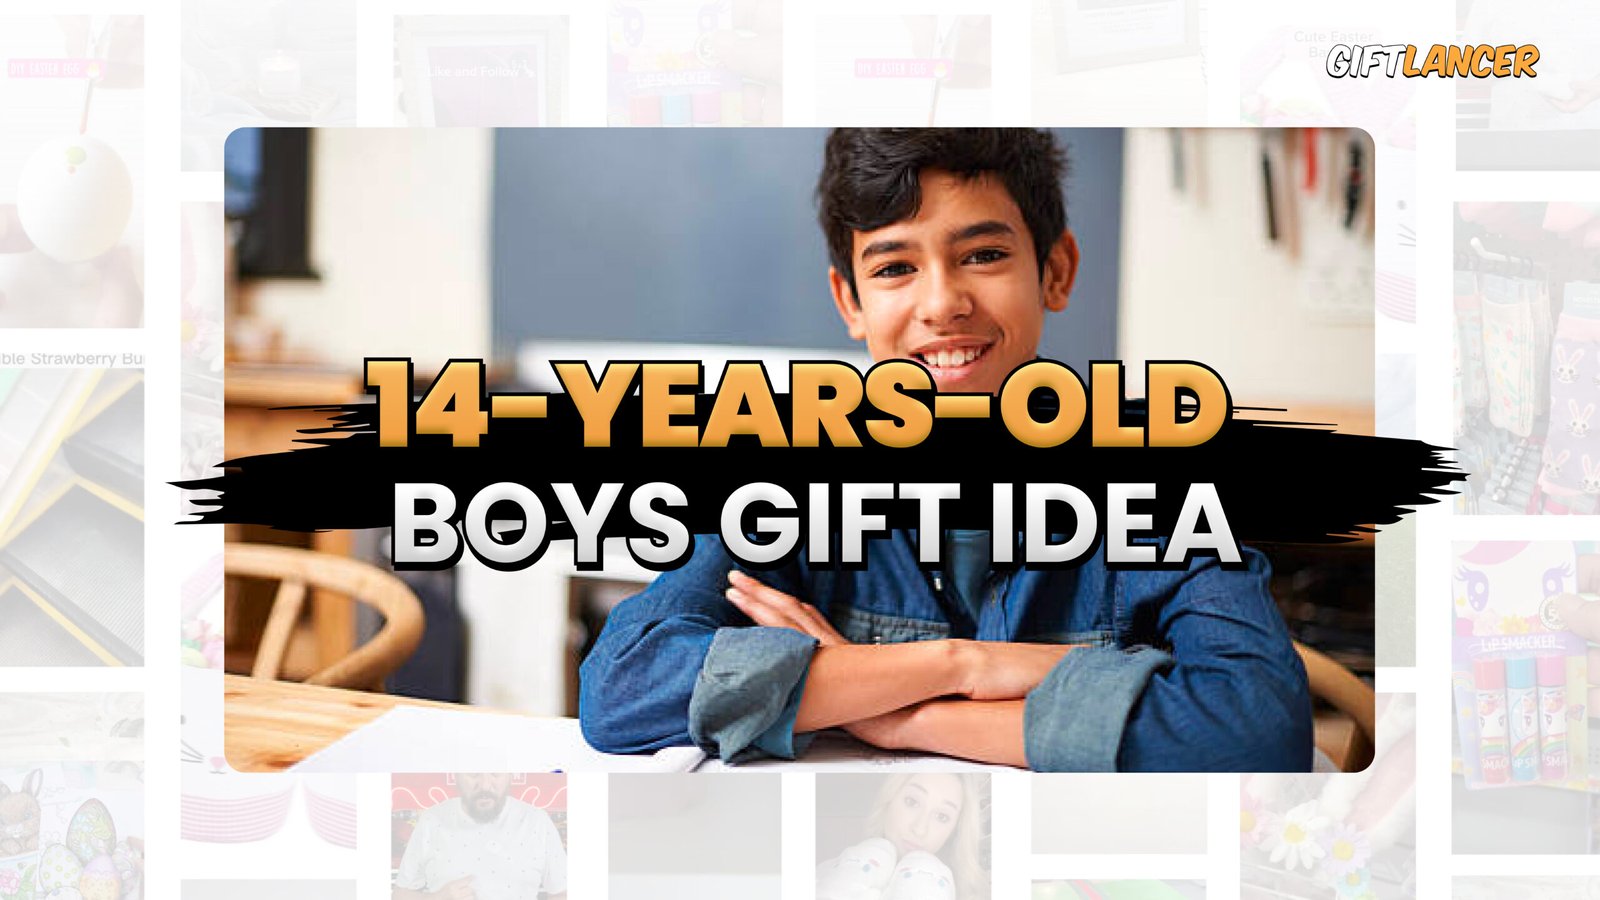 banner image for the topic Gift ideas for 14 years old Boy